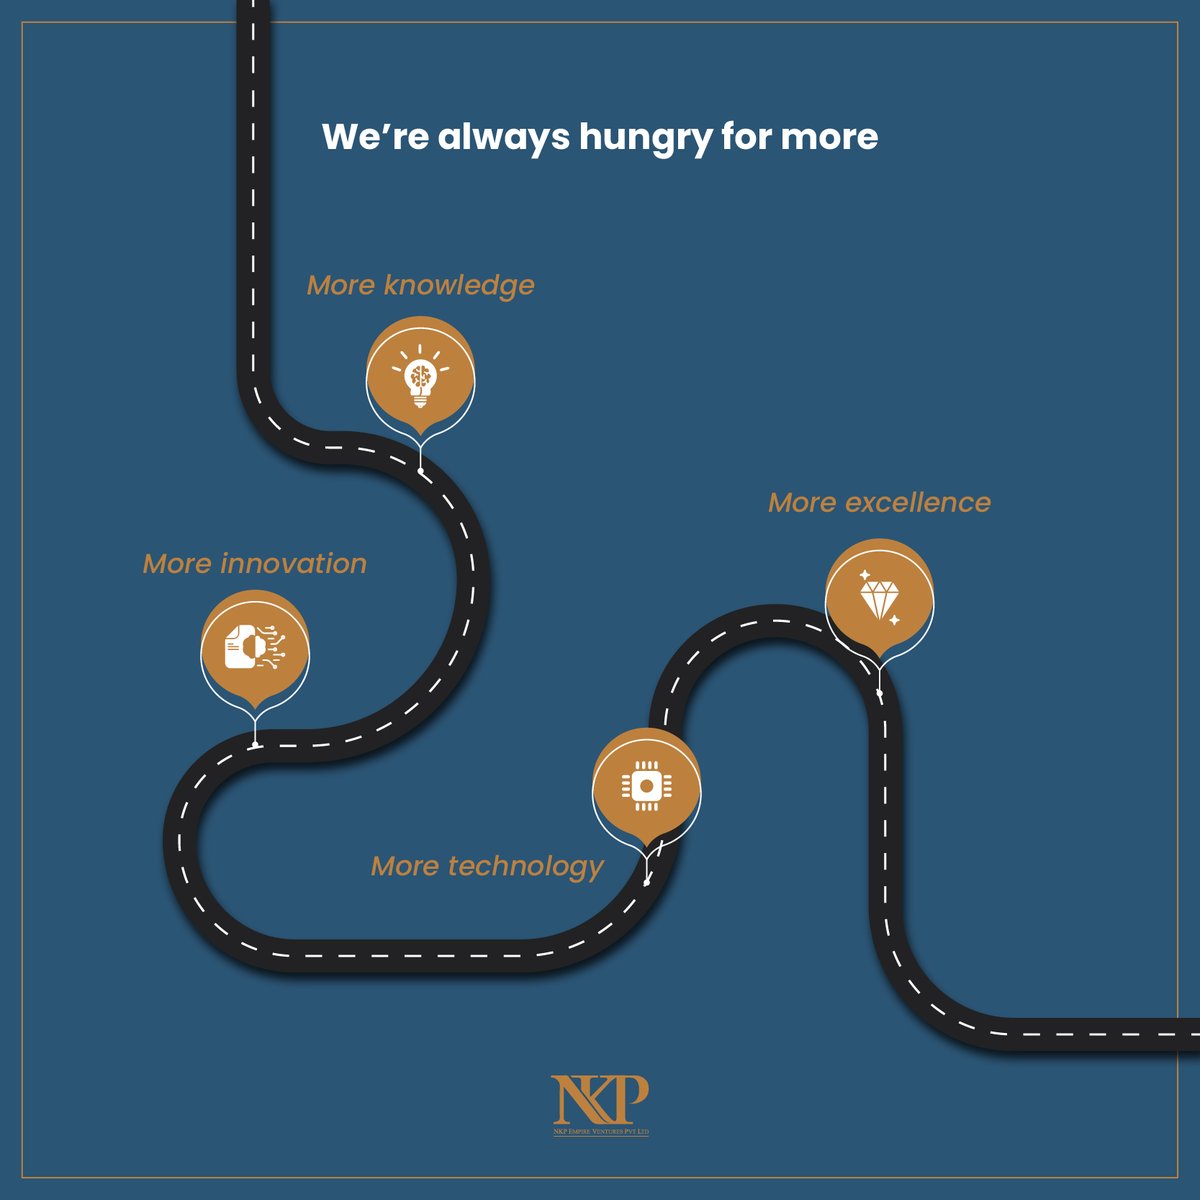 We're always innovating, exploring culinary frontiers fueled by a hunger for more—knowledge, excellence, technology. The road never ends, and neither does our appetite! 

#NKPExcellence #CulinaryMasters #FoodInnovationAlways